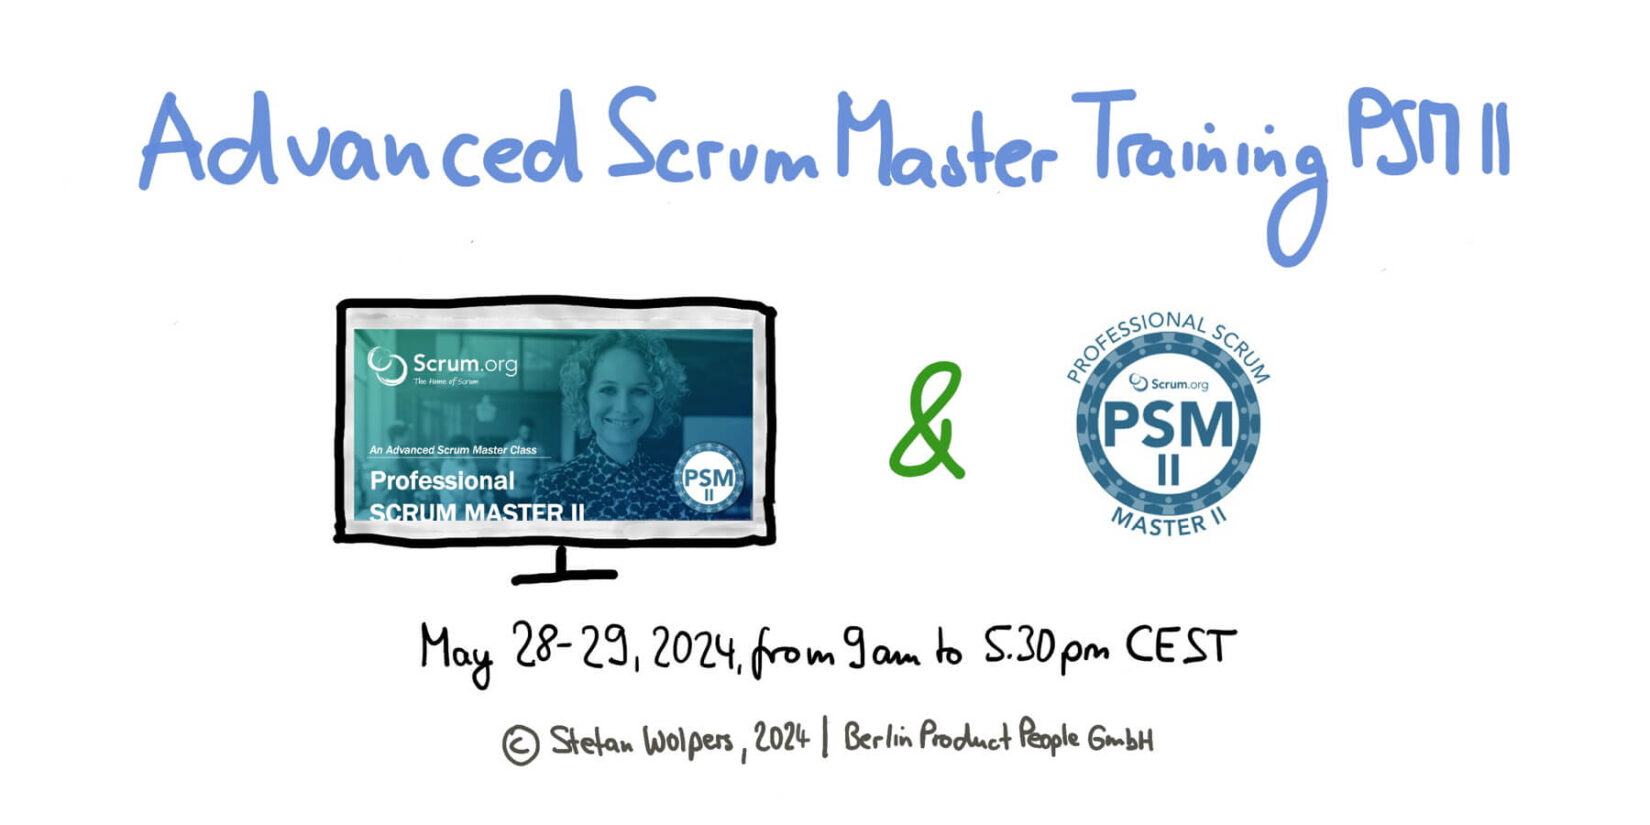 Advanced Professional Scrum Master Training w/ PSM II Certificate — May 28-29, 2024 — Berlin-Product-People.com